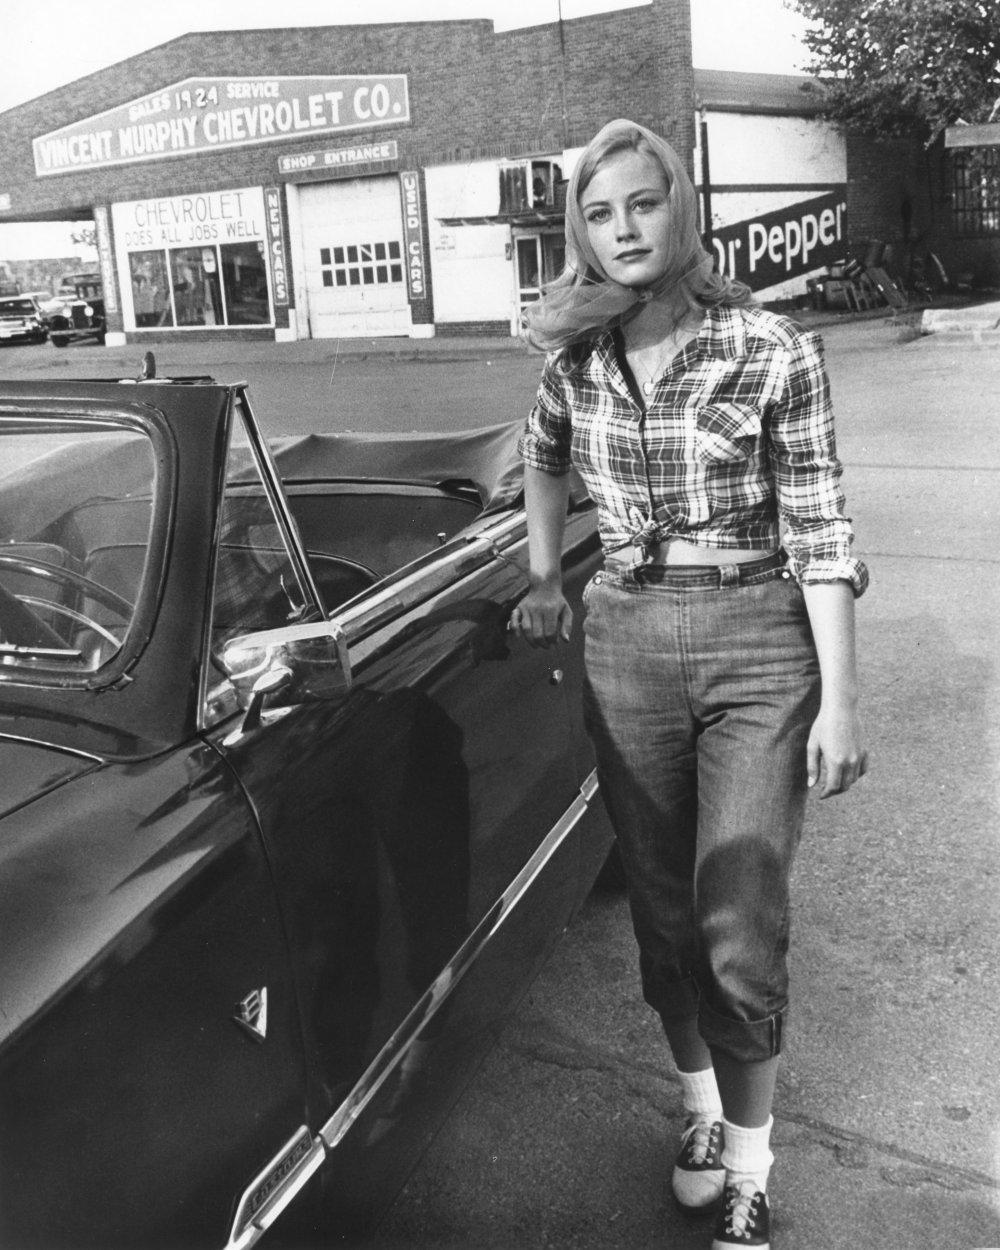 1971 The Last Picture Show